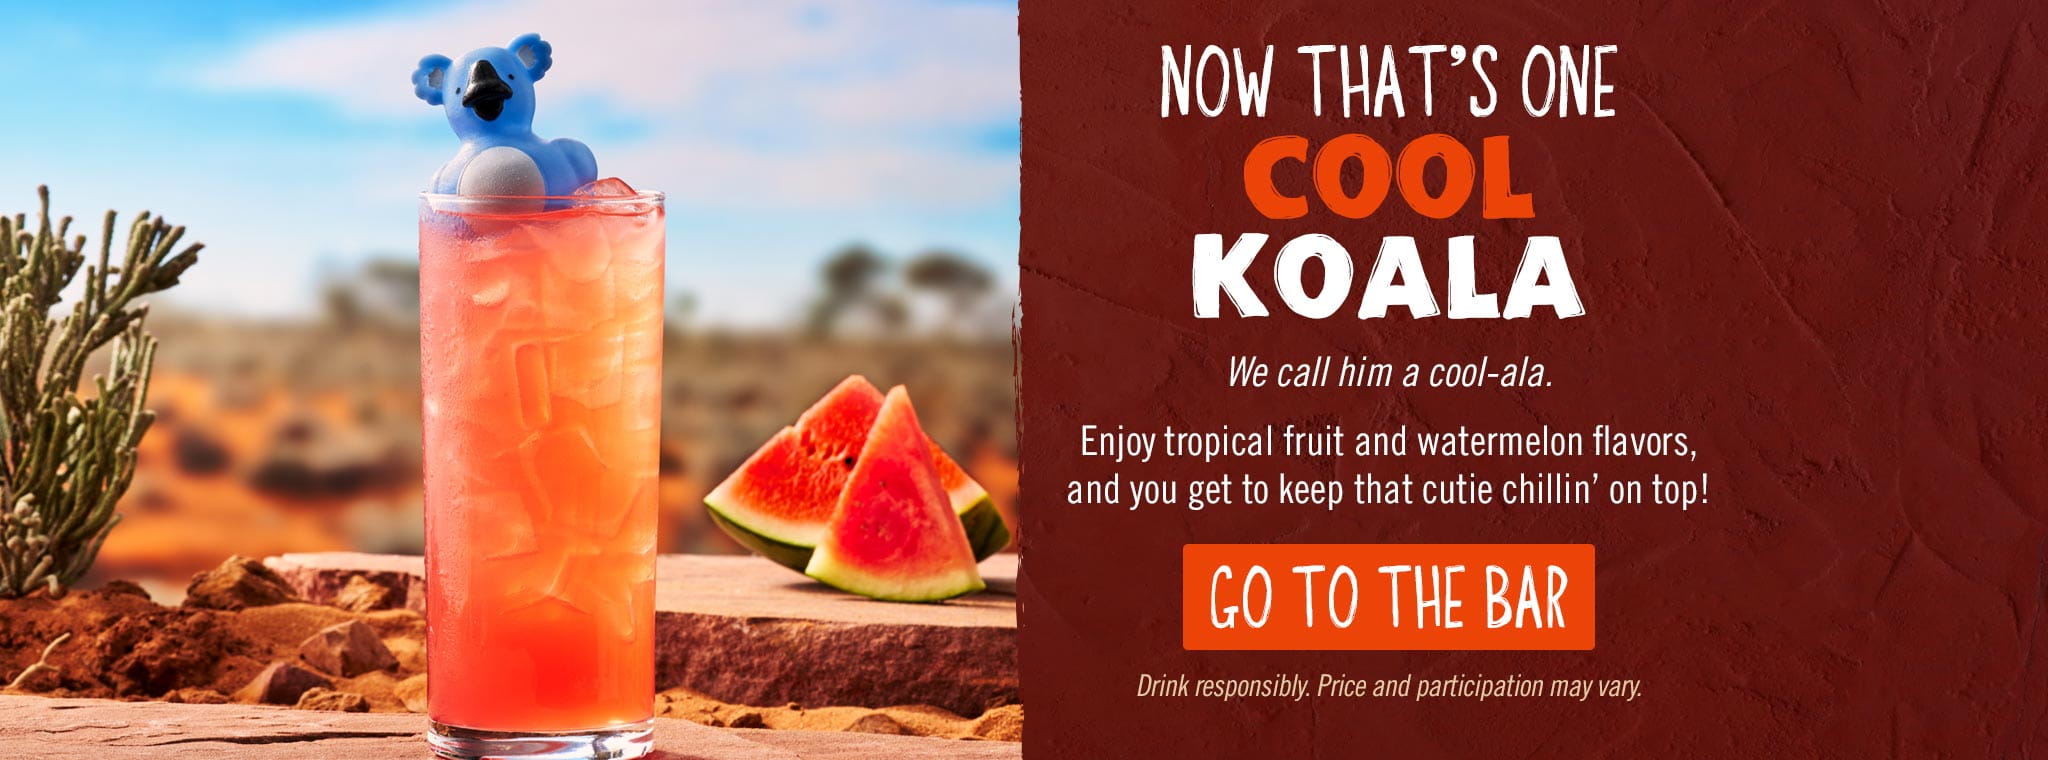 Now That's One Cool Koala. We call him cool-ala. GO TO THE BAR. Drink responsibly. Price and participation may vary.